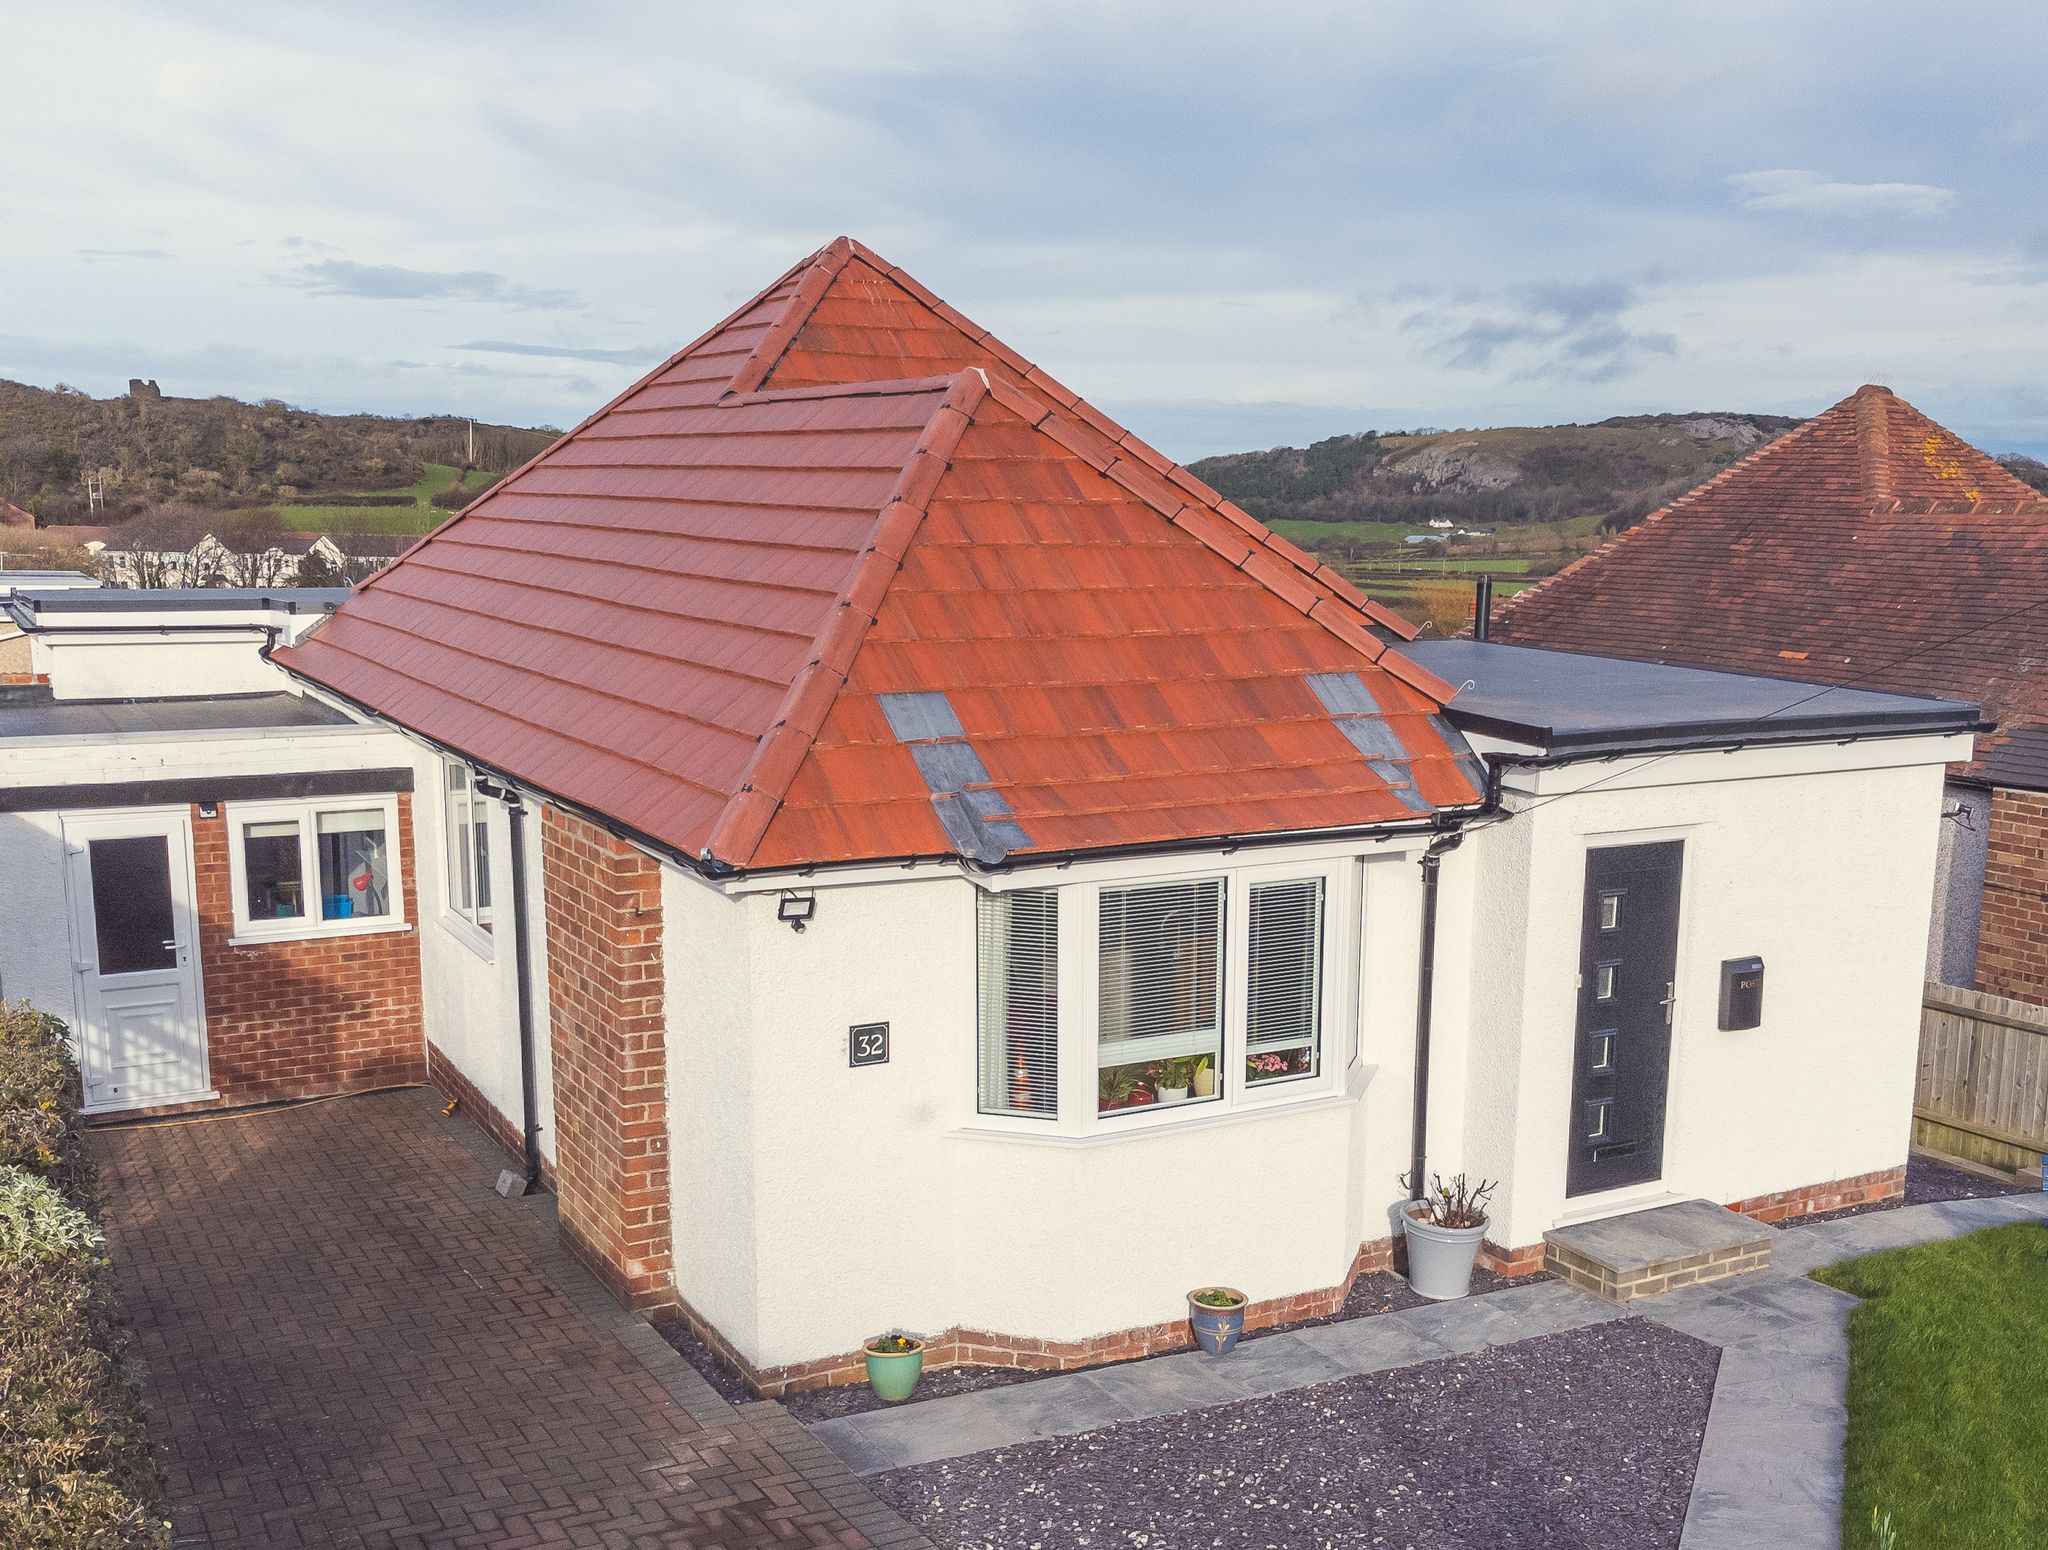 Tile Roof Contractors Llanymawddwy, SY20 - DD Roofing